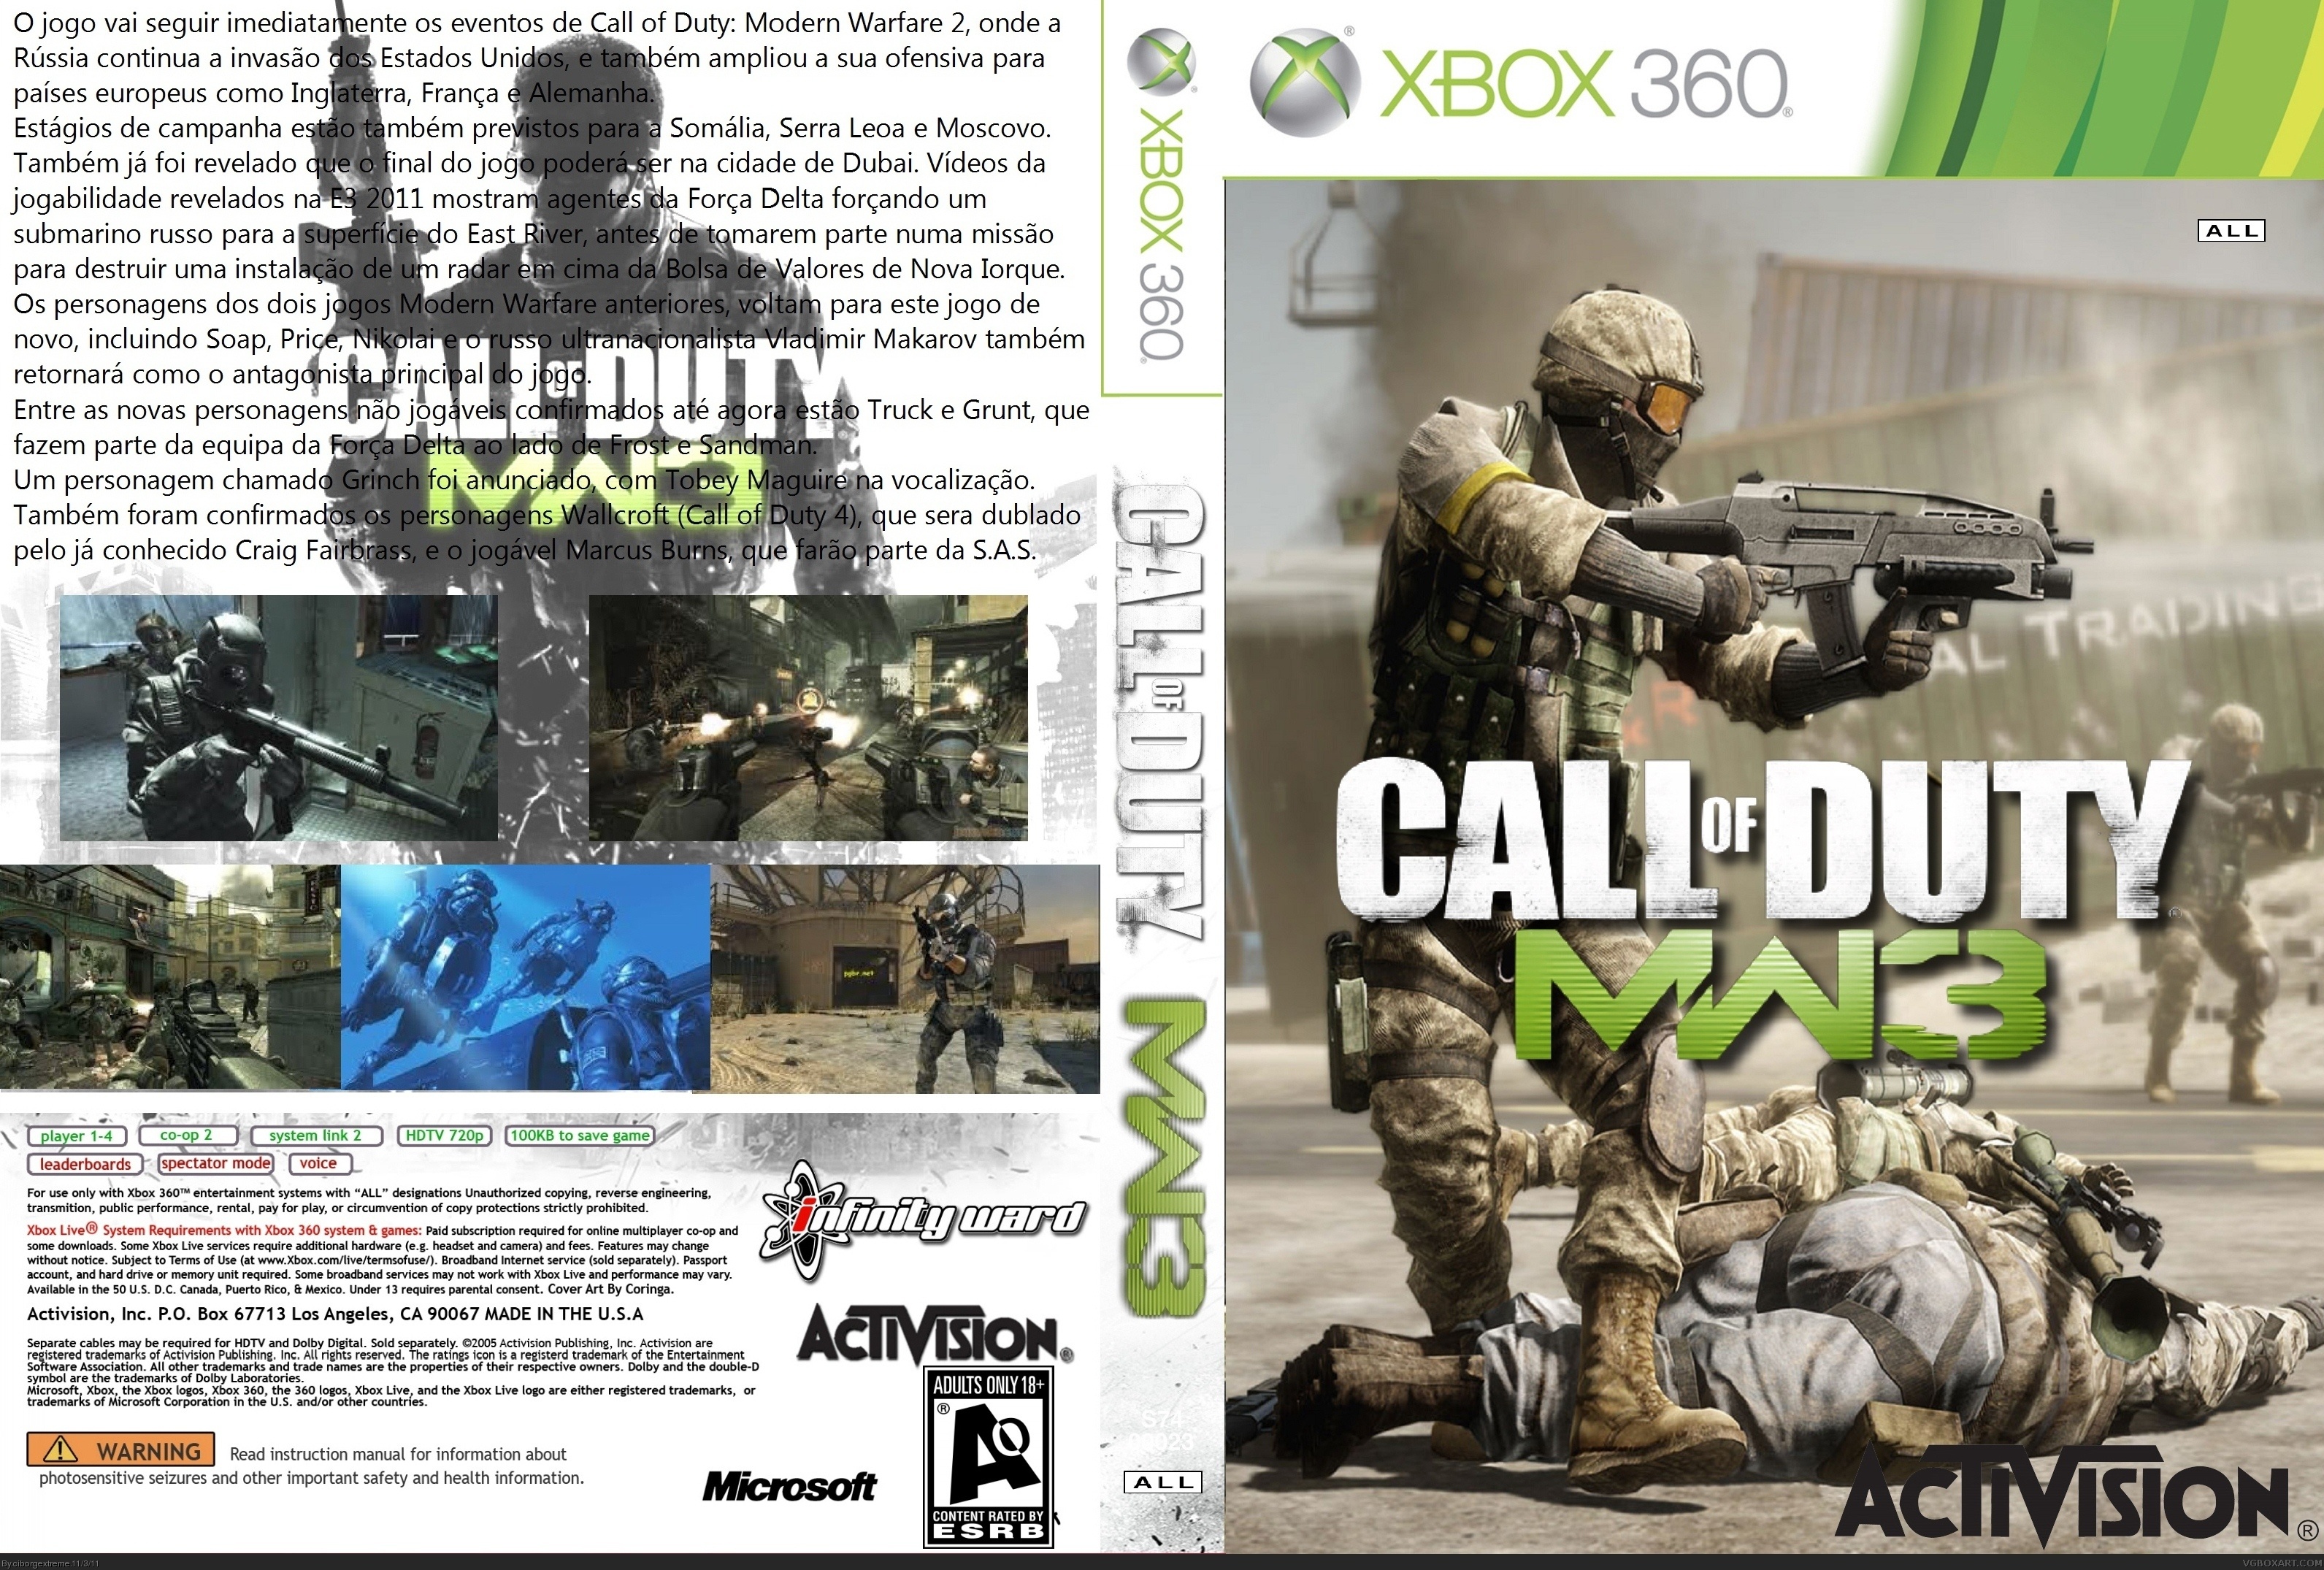 call of duty world at war xbox 360 free download